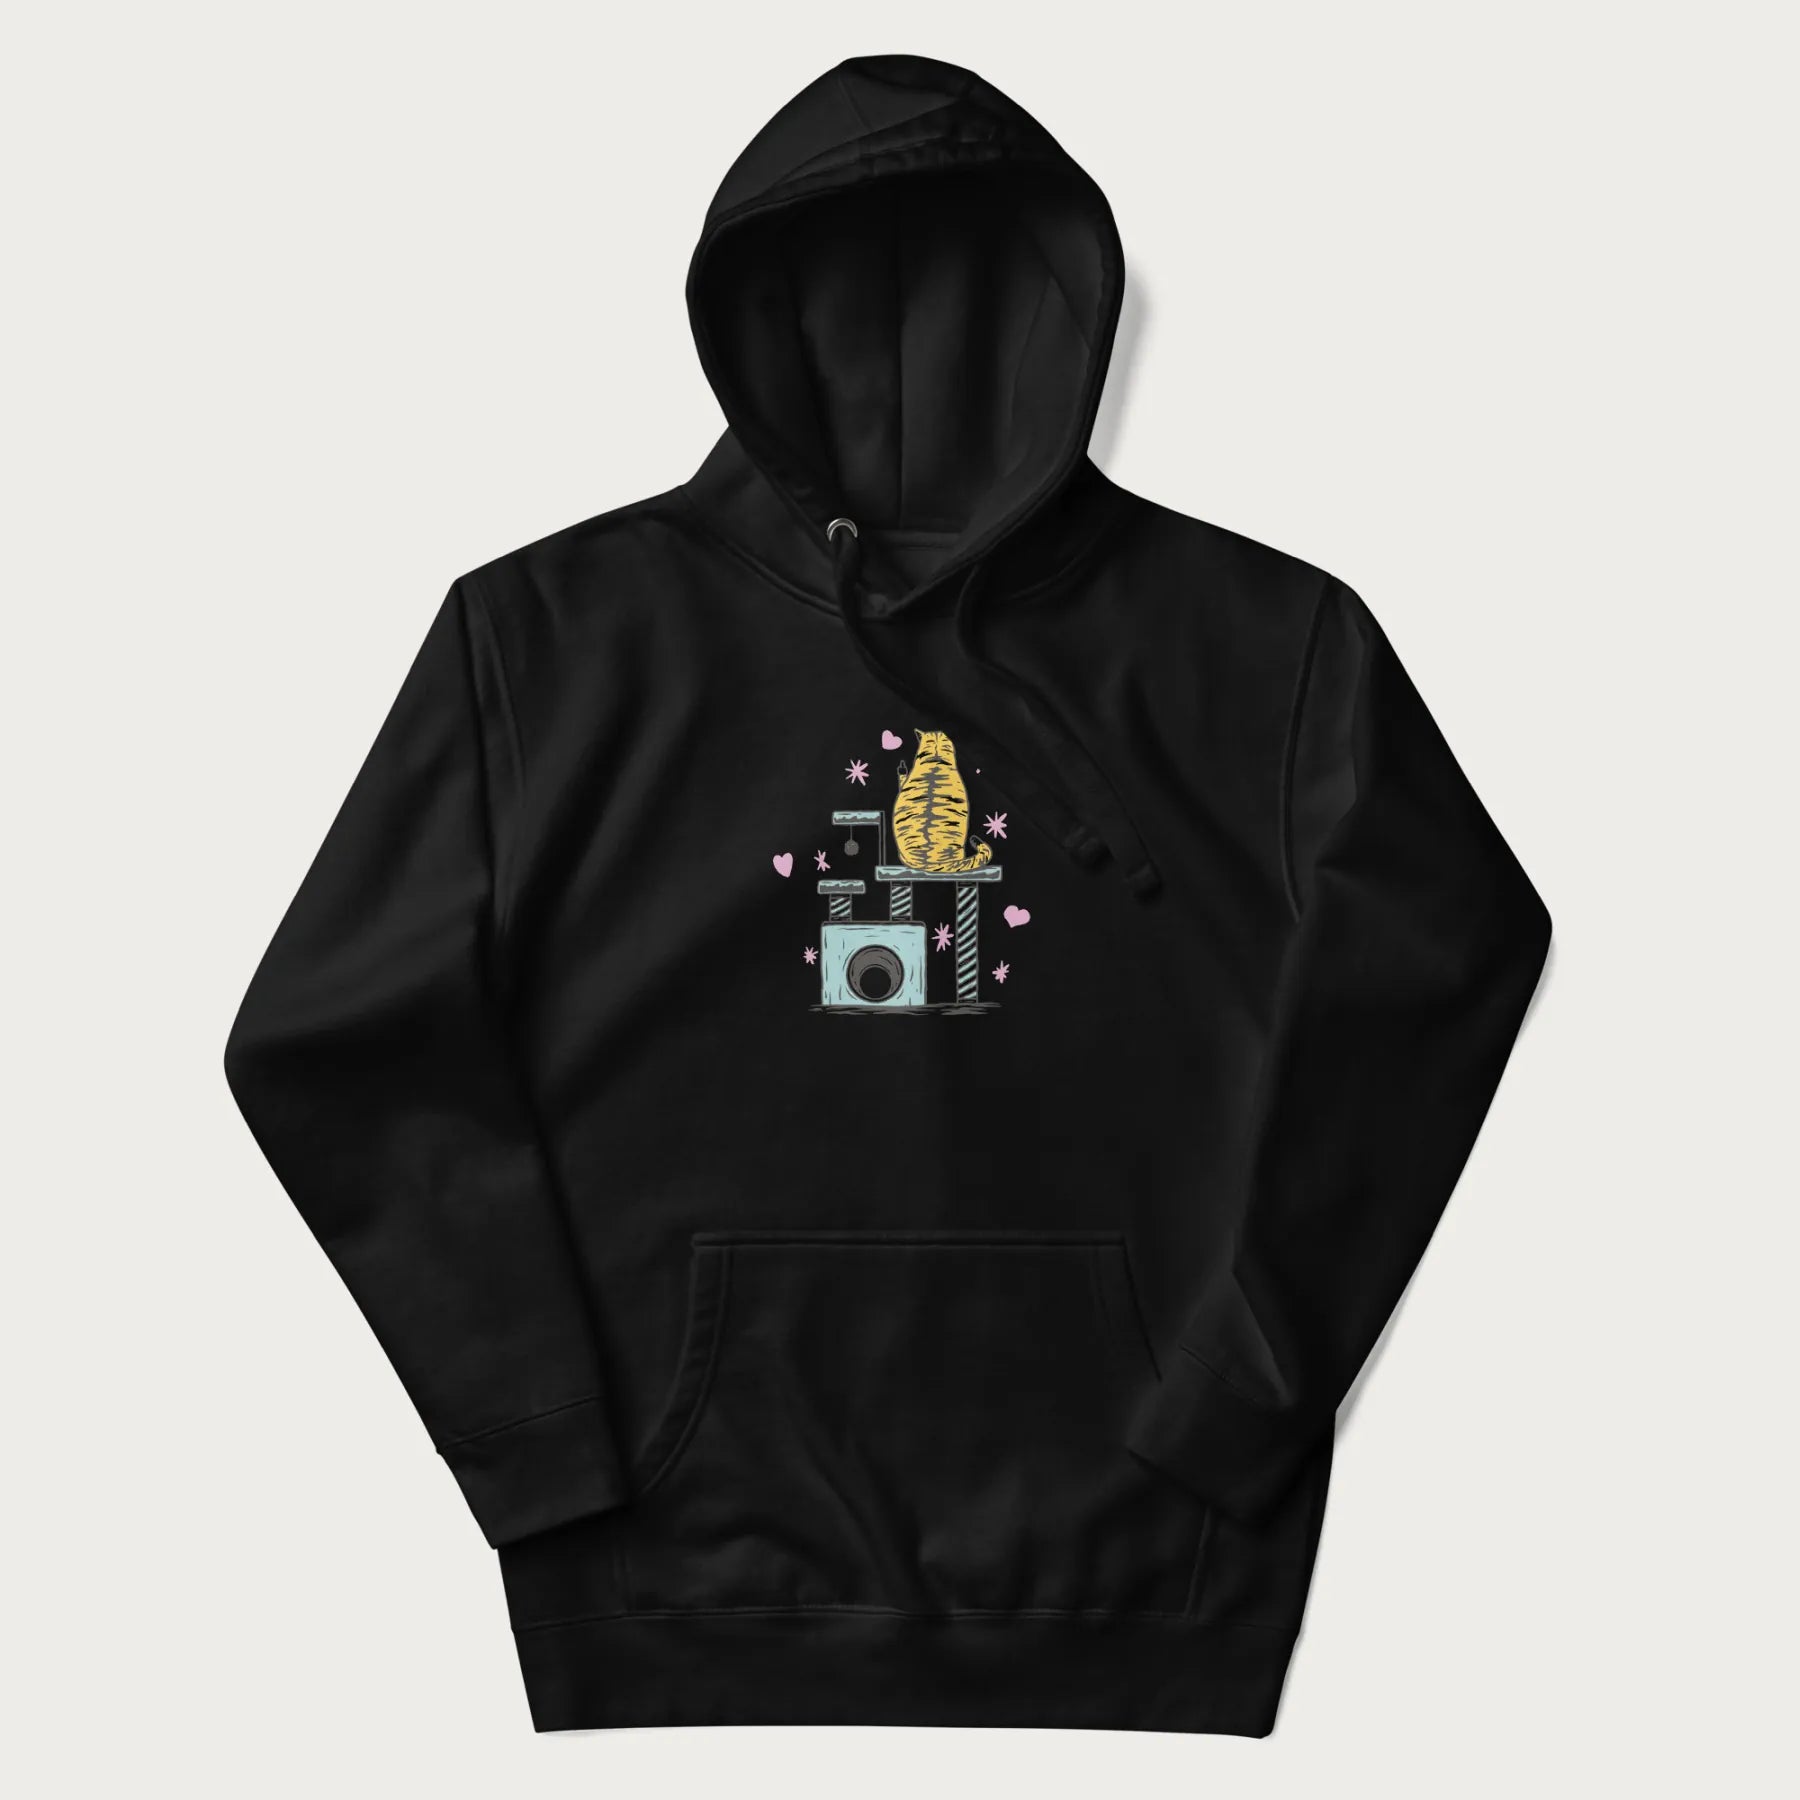 Black hoodie with graphic of a tabby cat on a scratching post, raising its middle finger.